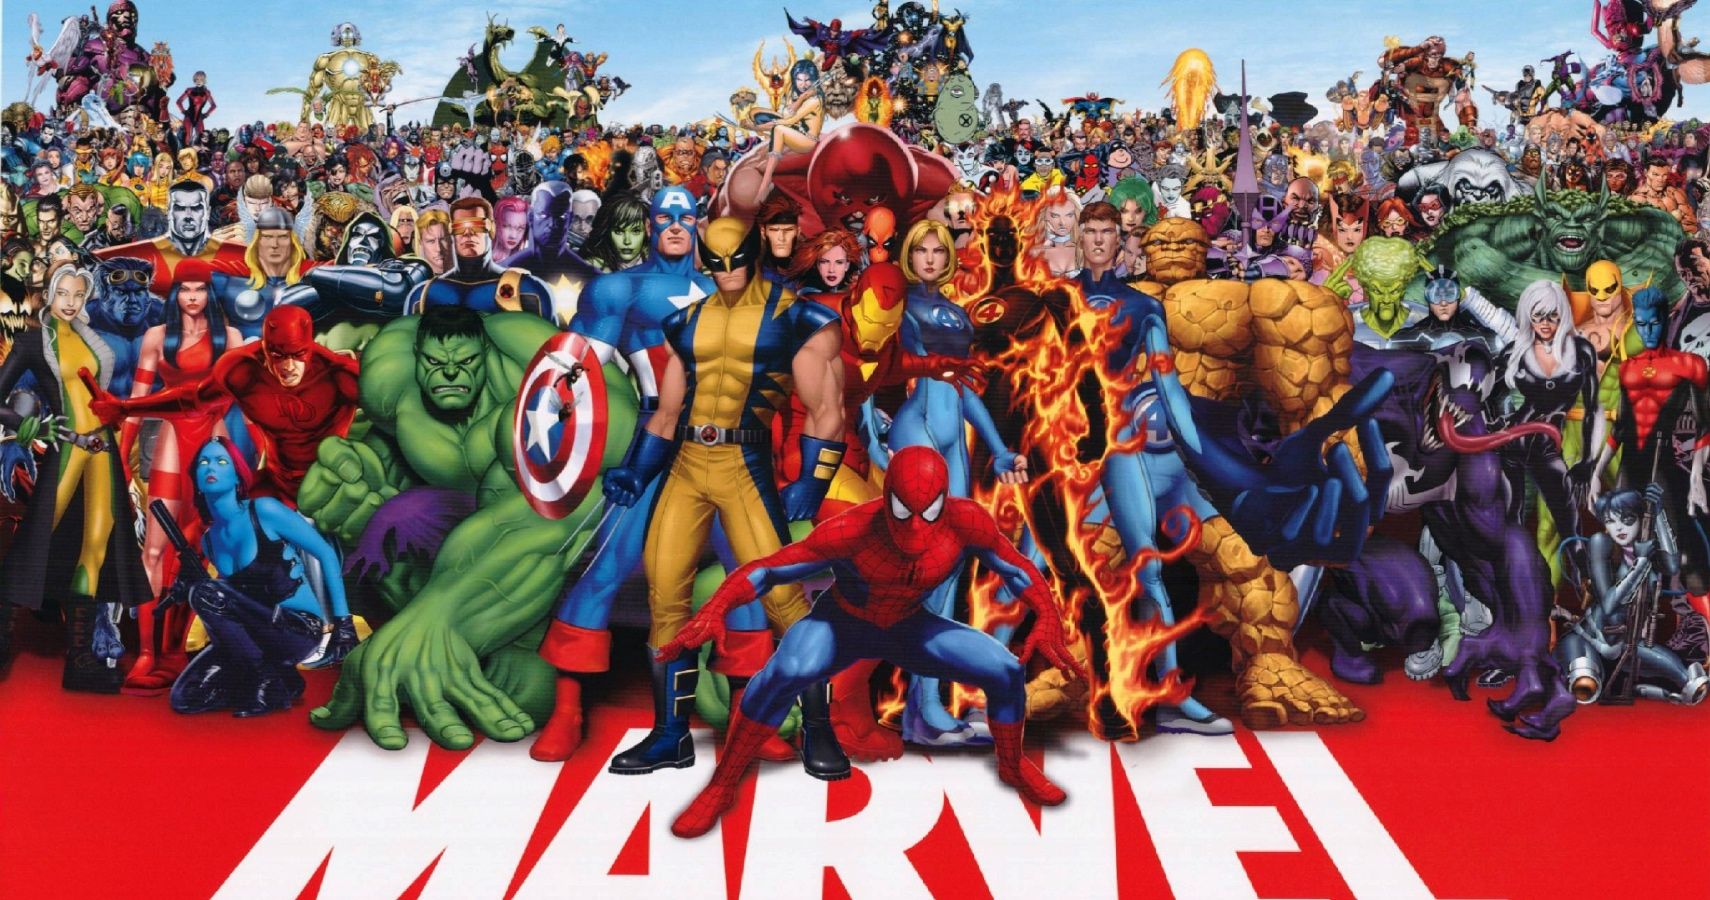 the full marvel roster standing together